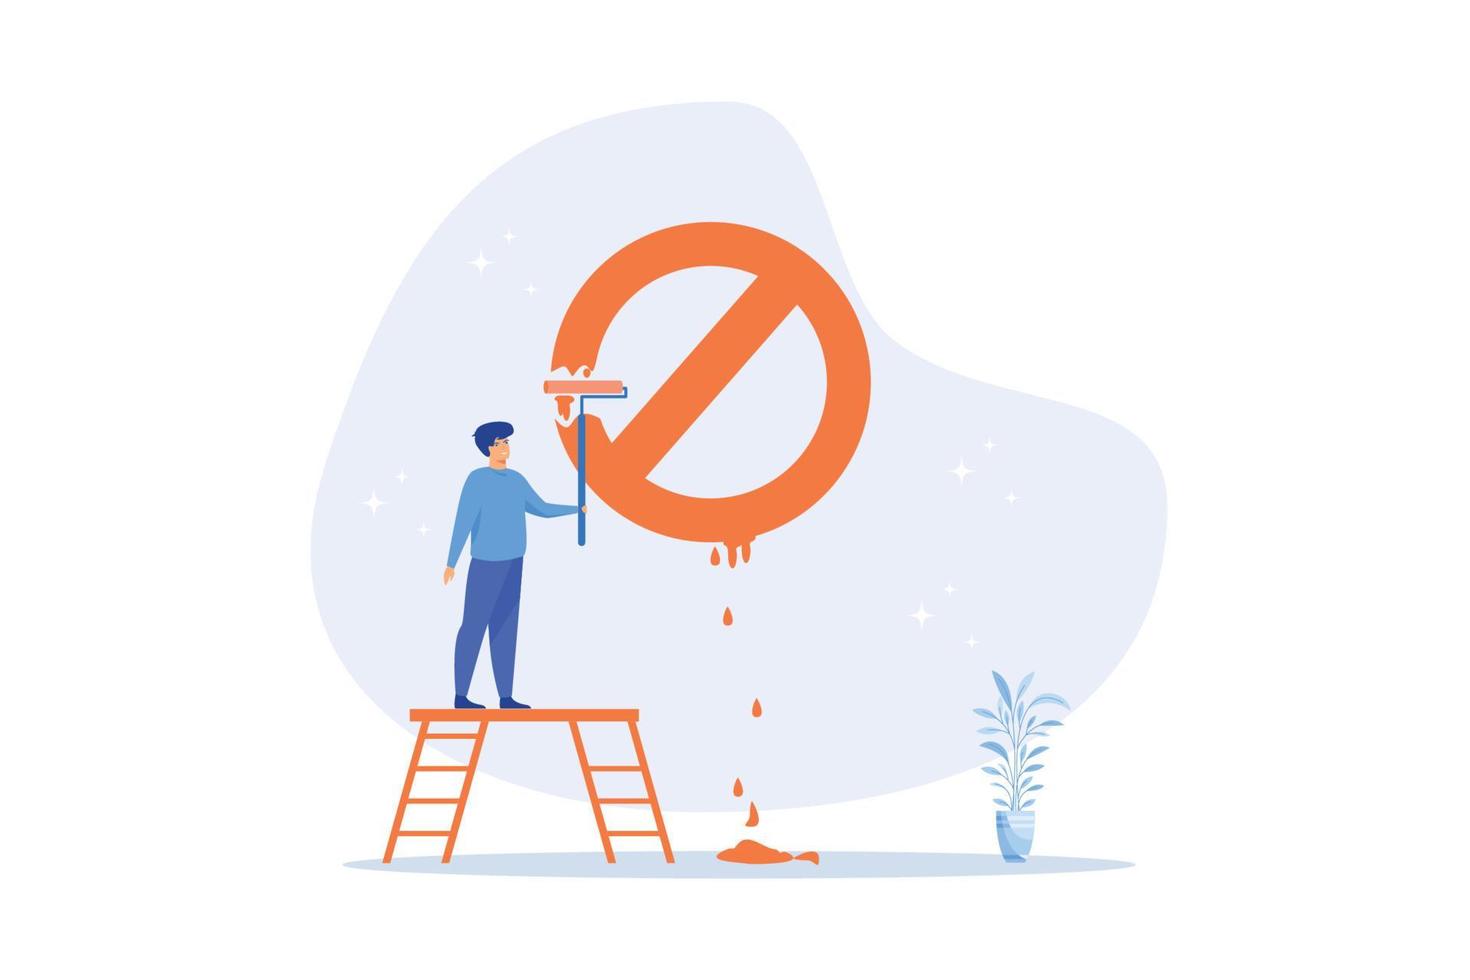 Prohibition or stop sign, forbidden, unlawful or not allow to do, attention and warning sign, banned or illegal concept, flat vector modern illustration